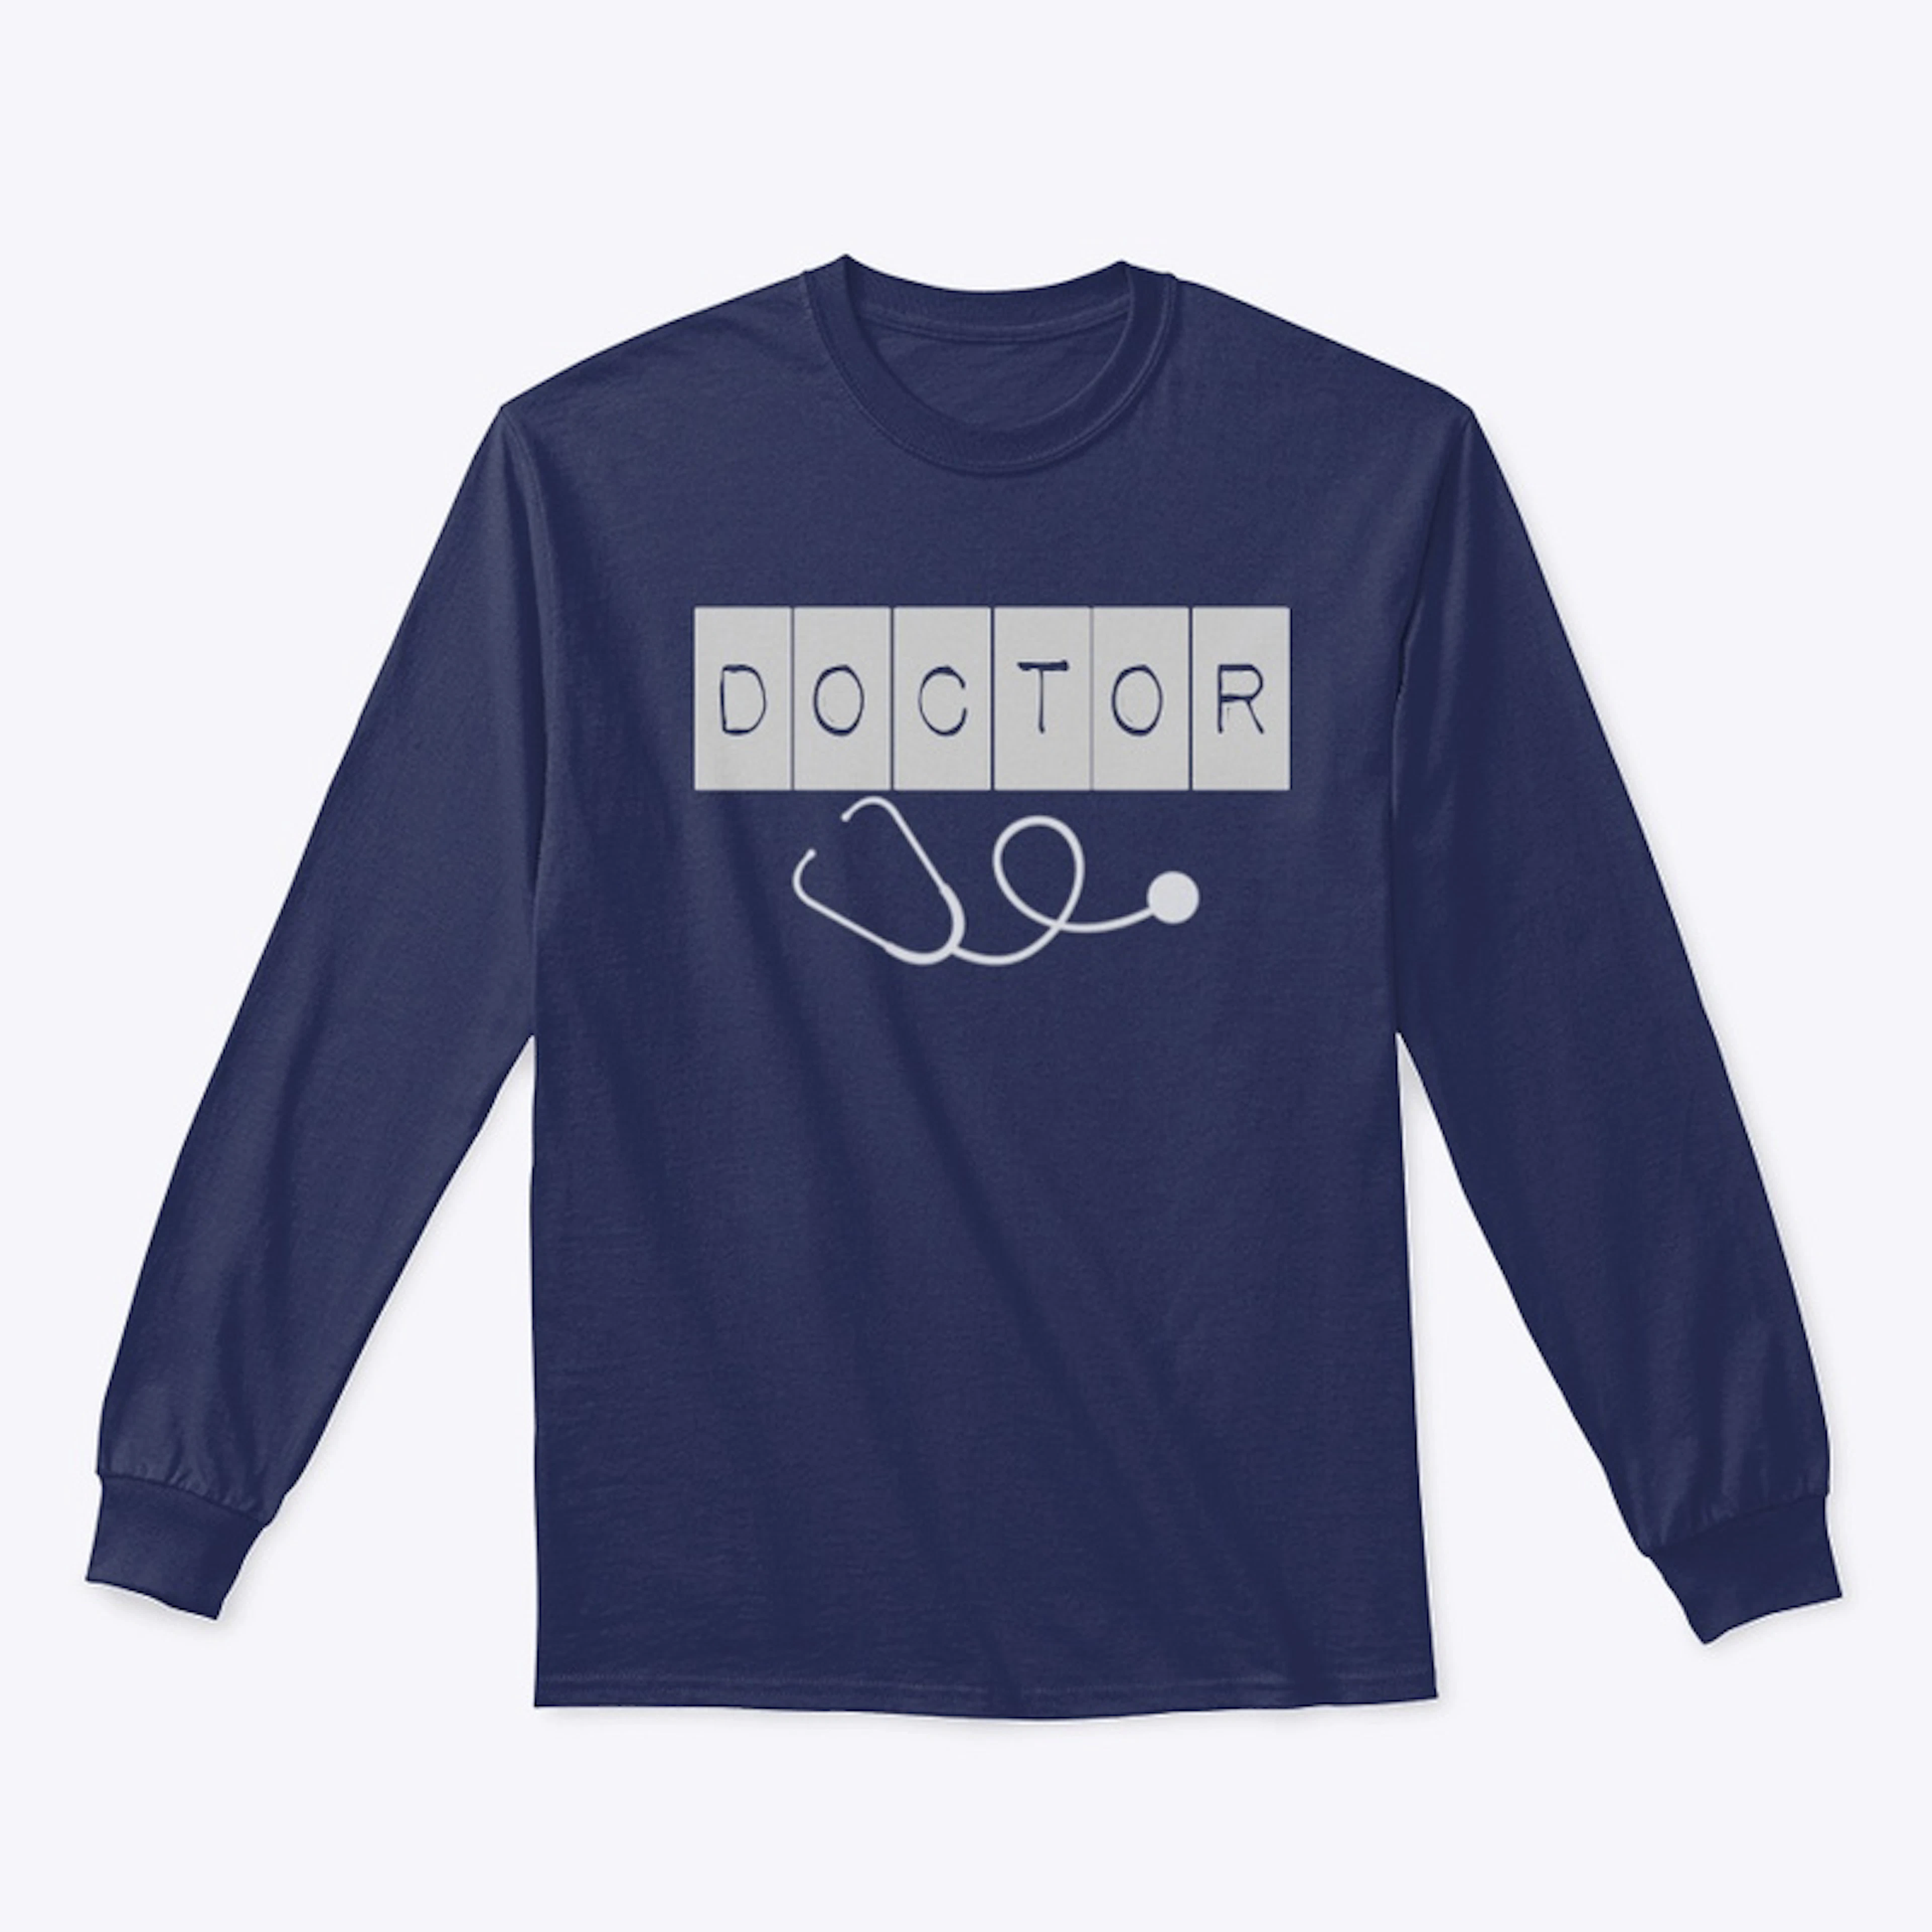 DOCTOR 